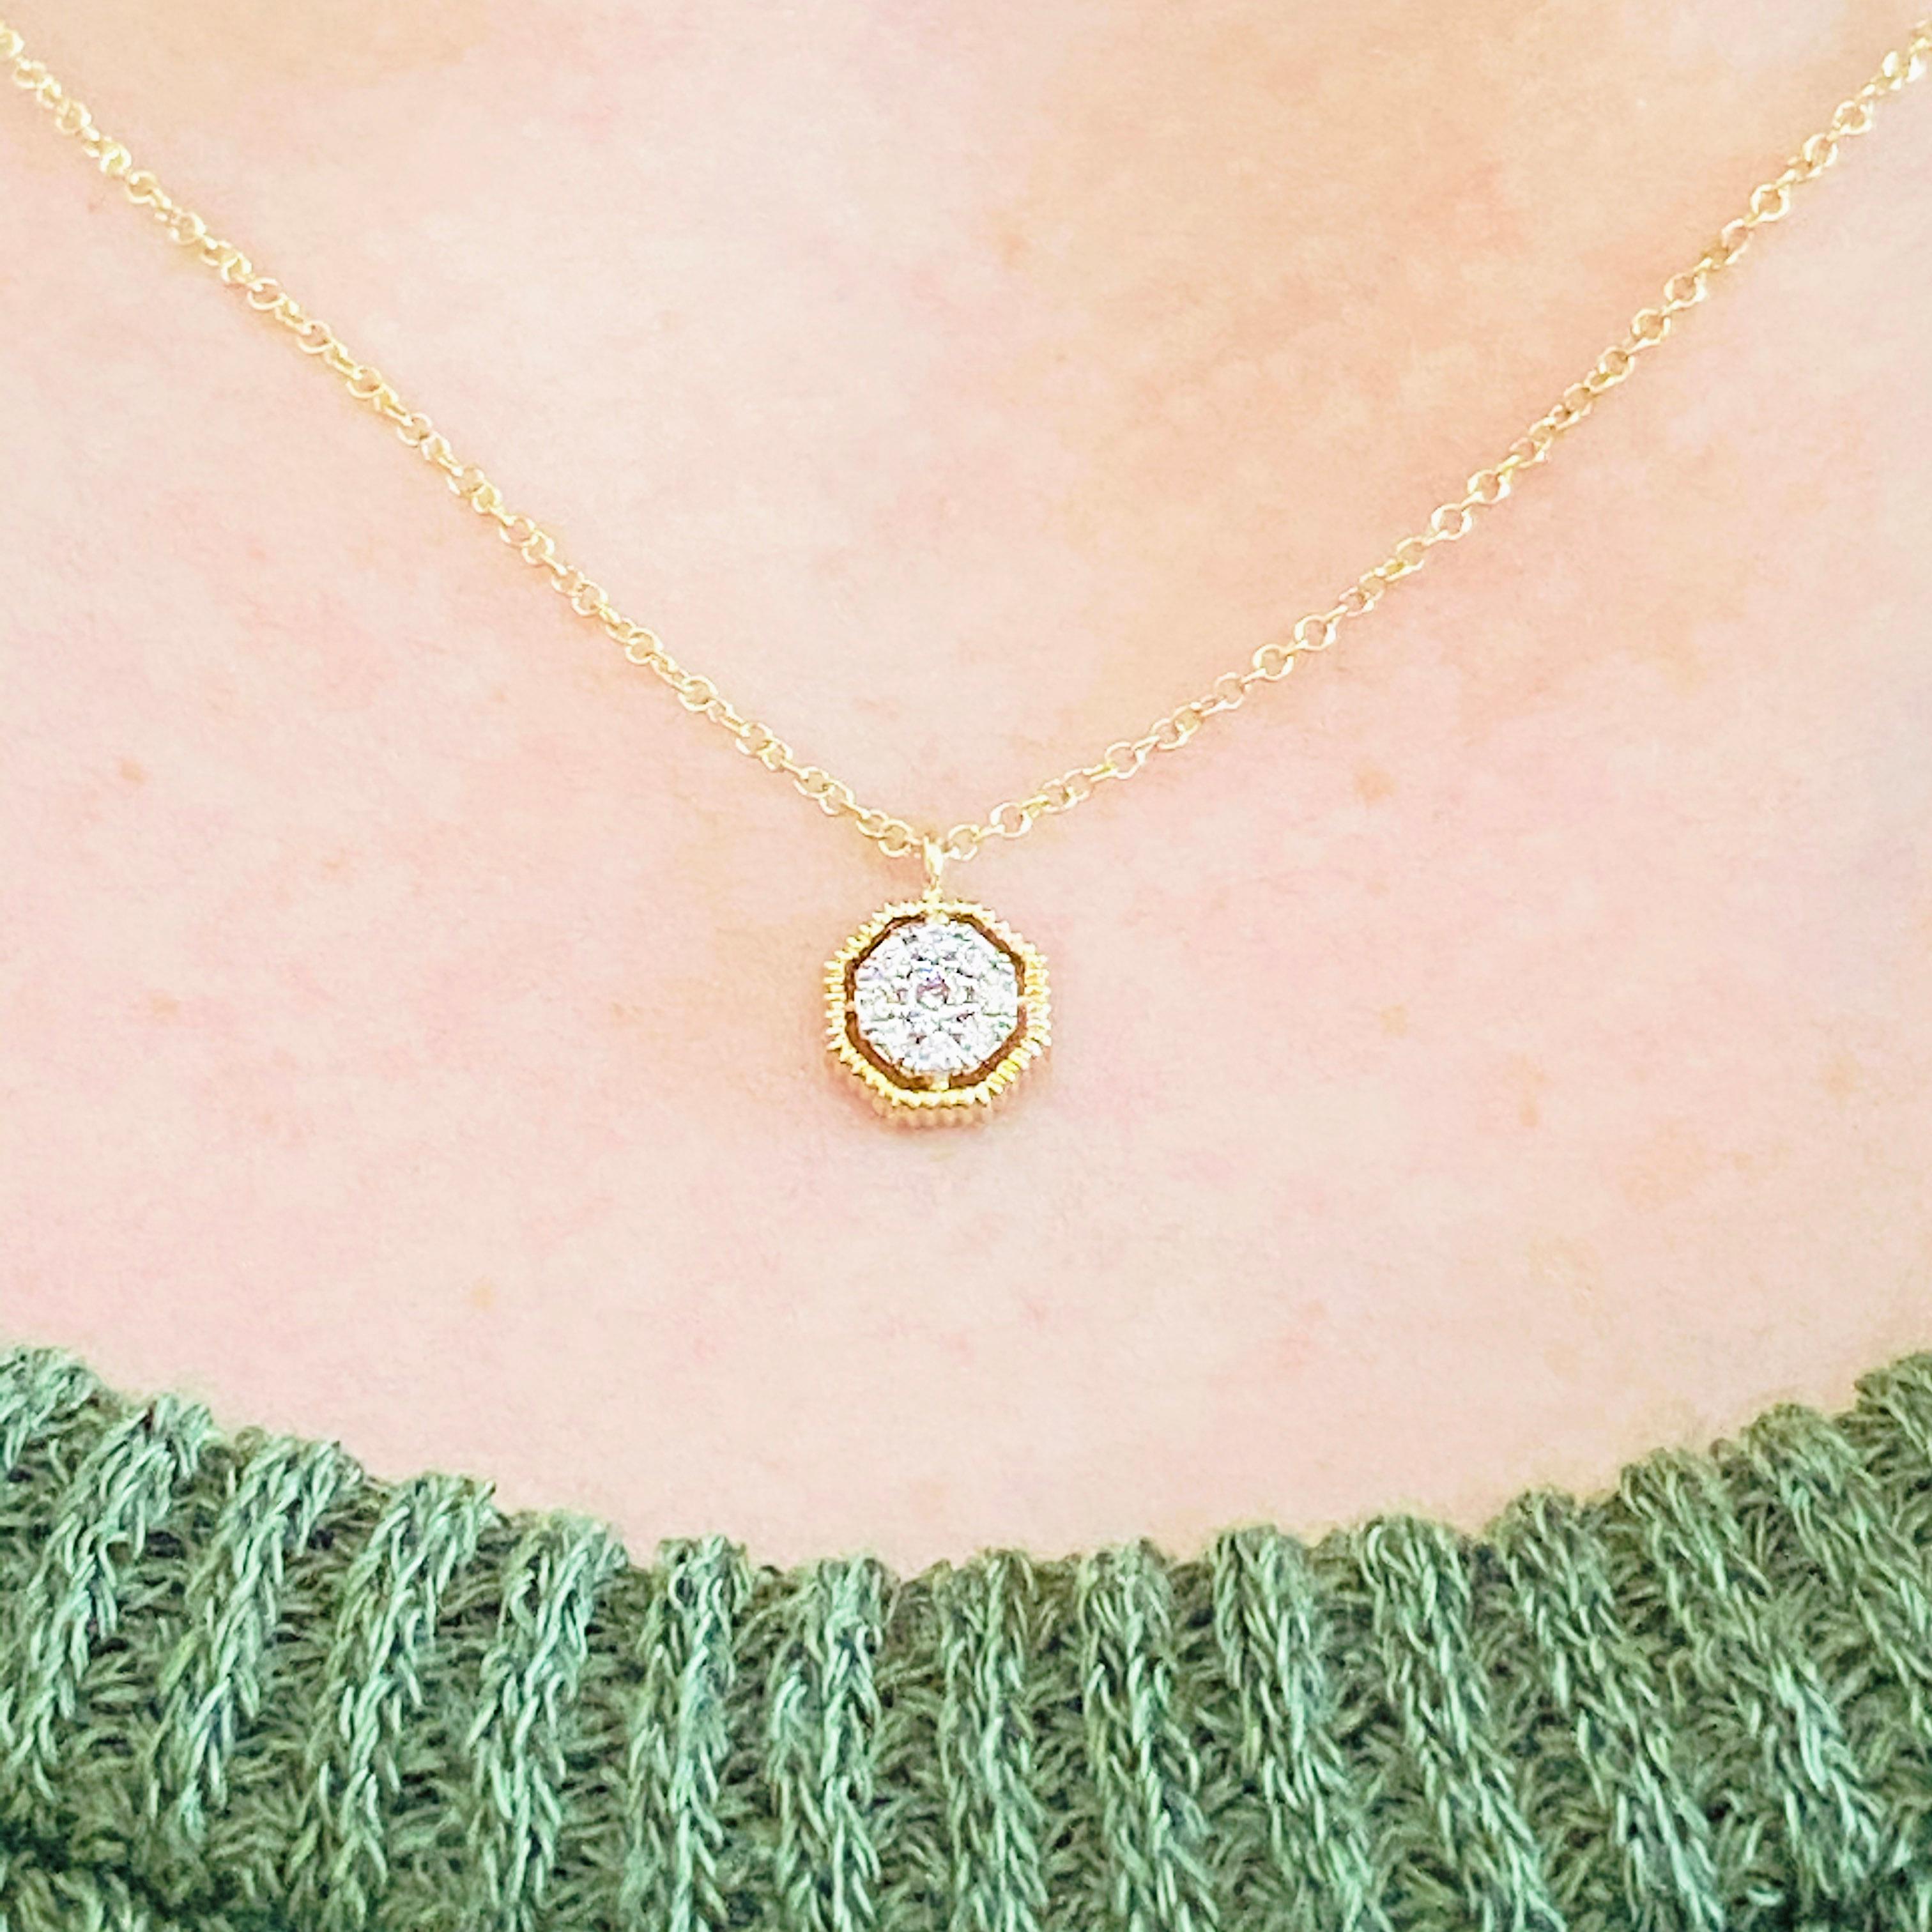 This Gabriel & Co. gorgeous original 14k yellow gold octagonal pave diamond pendant necklace is the perfect mix between classic and trendy! This necklace is very fashionable and can add a touch of style to any outfit, yet it is also classy enough to